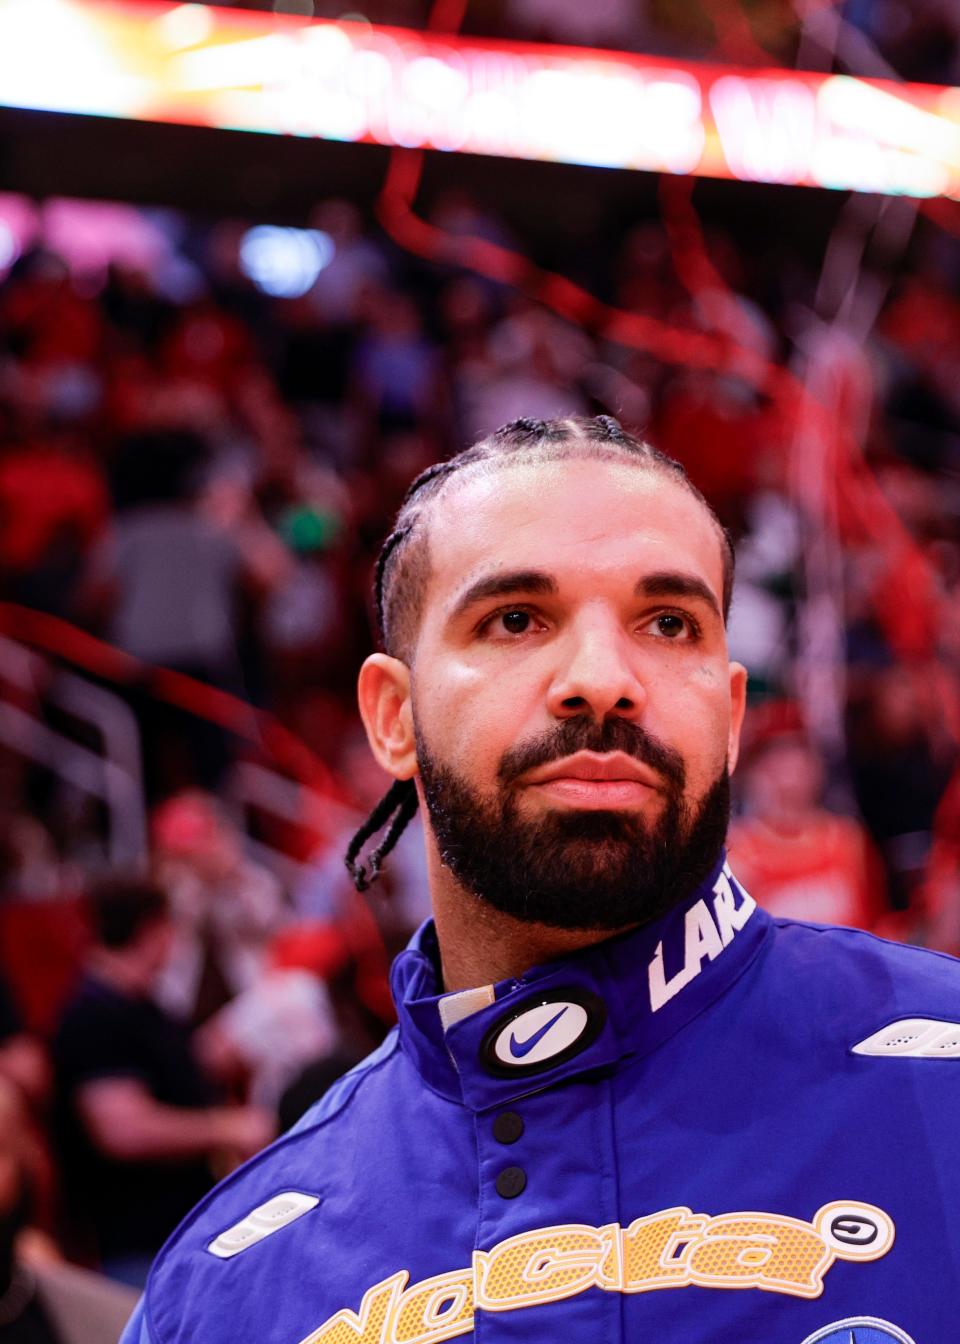 Drake is locked in a highly publicized rap beef with Kendrick Lamar.